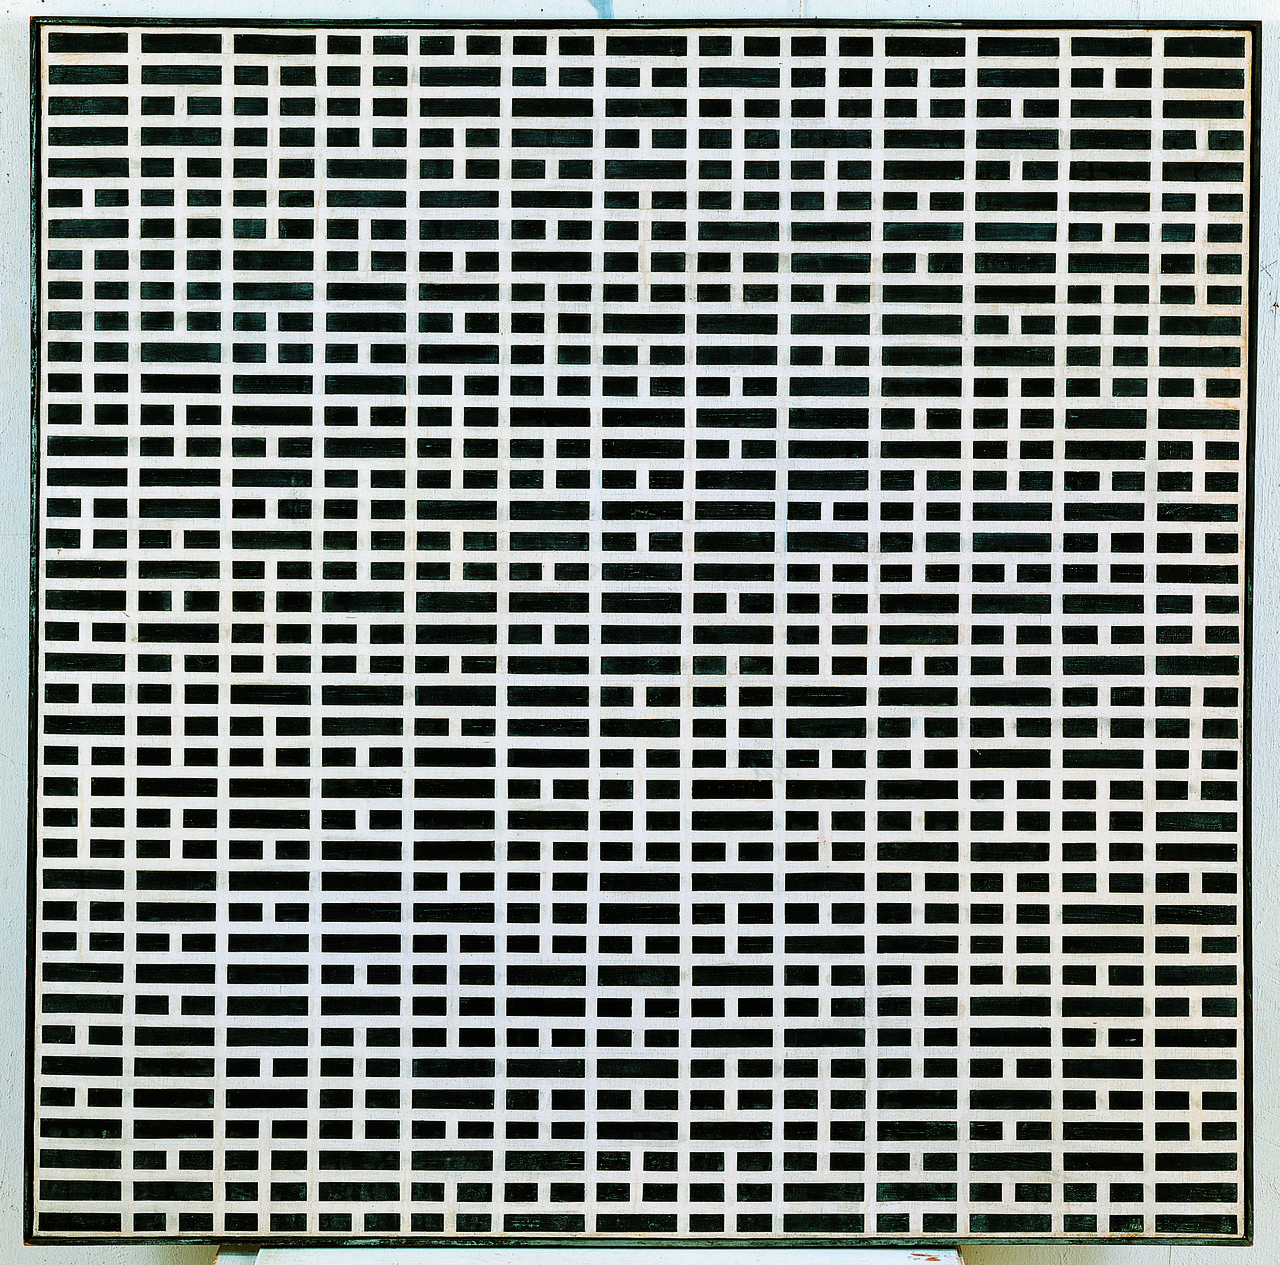 space 70-2, 130.5x130.5cm, oil on canvas, 1970